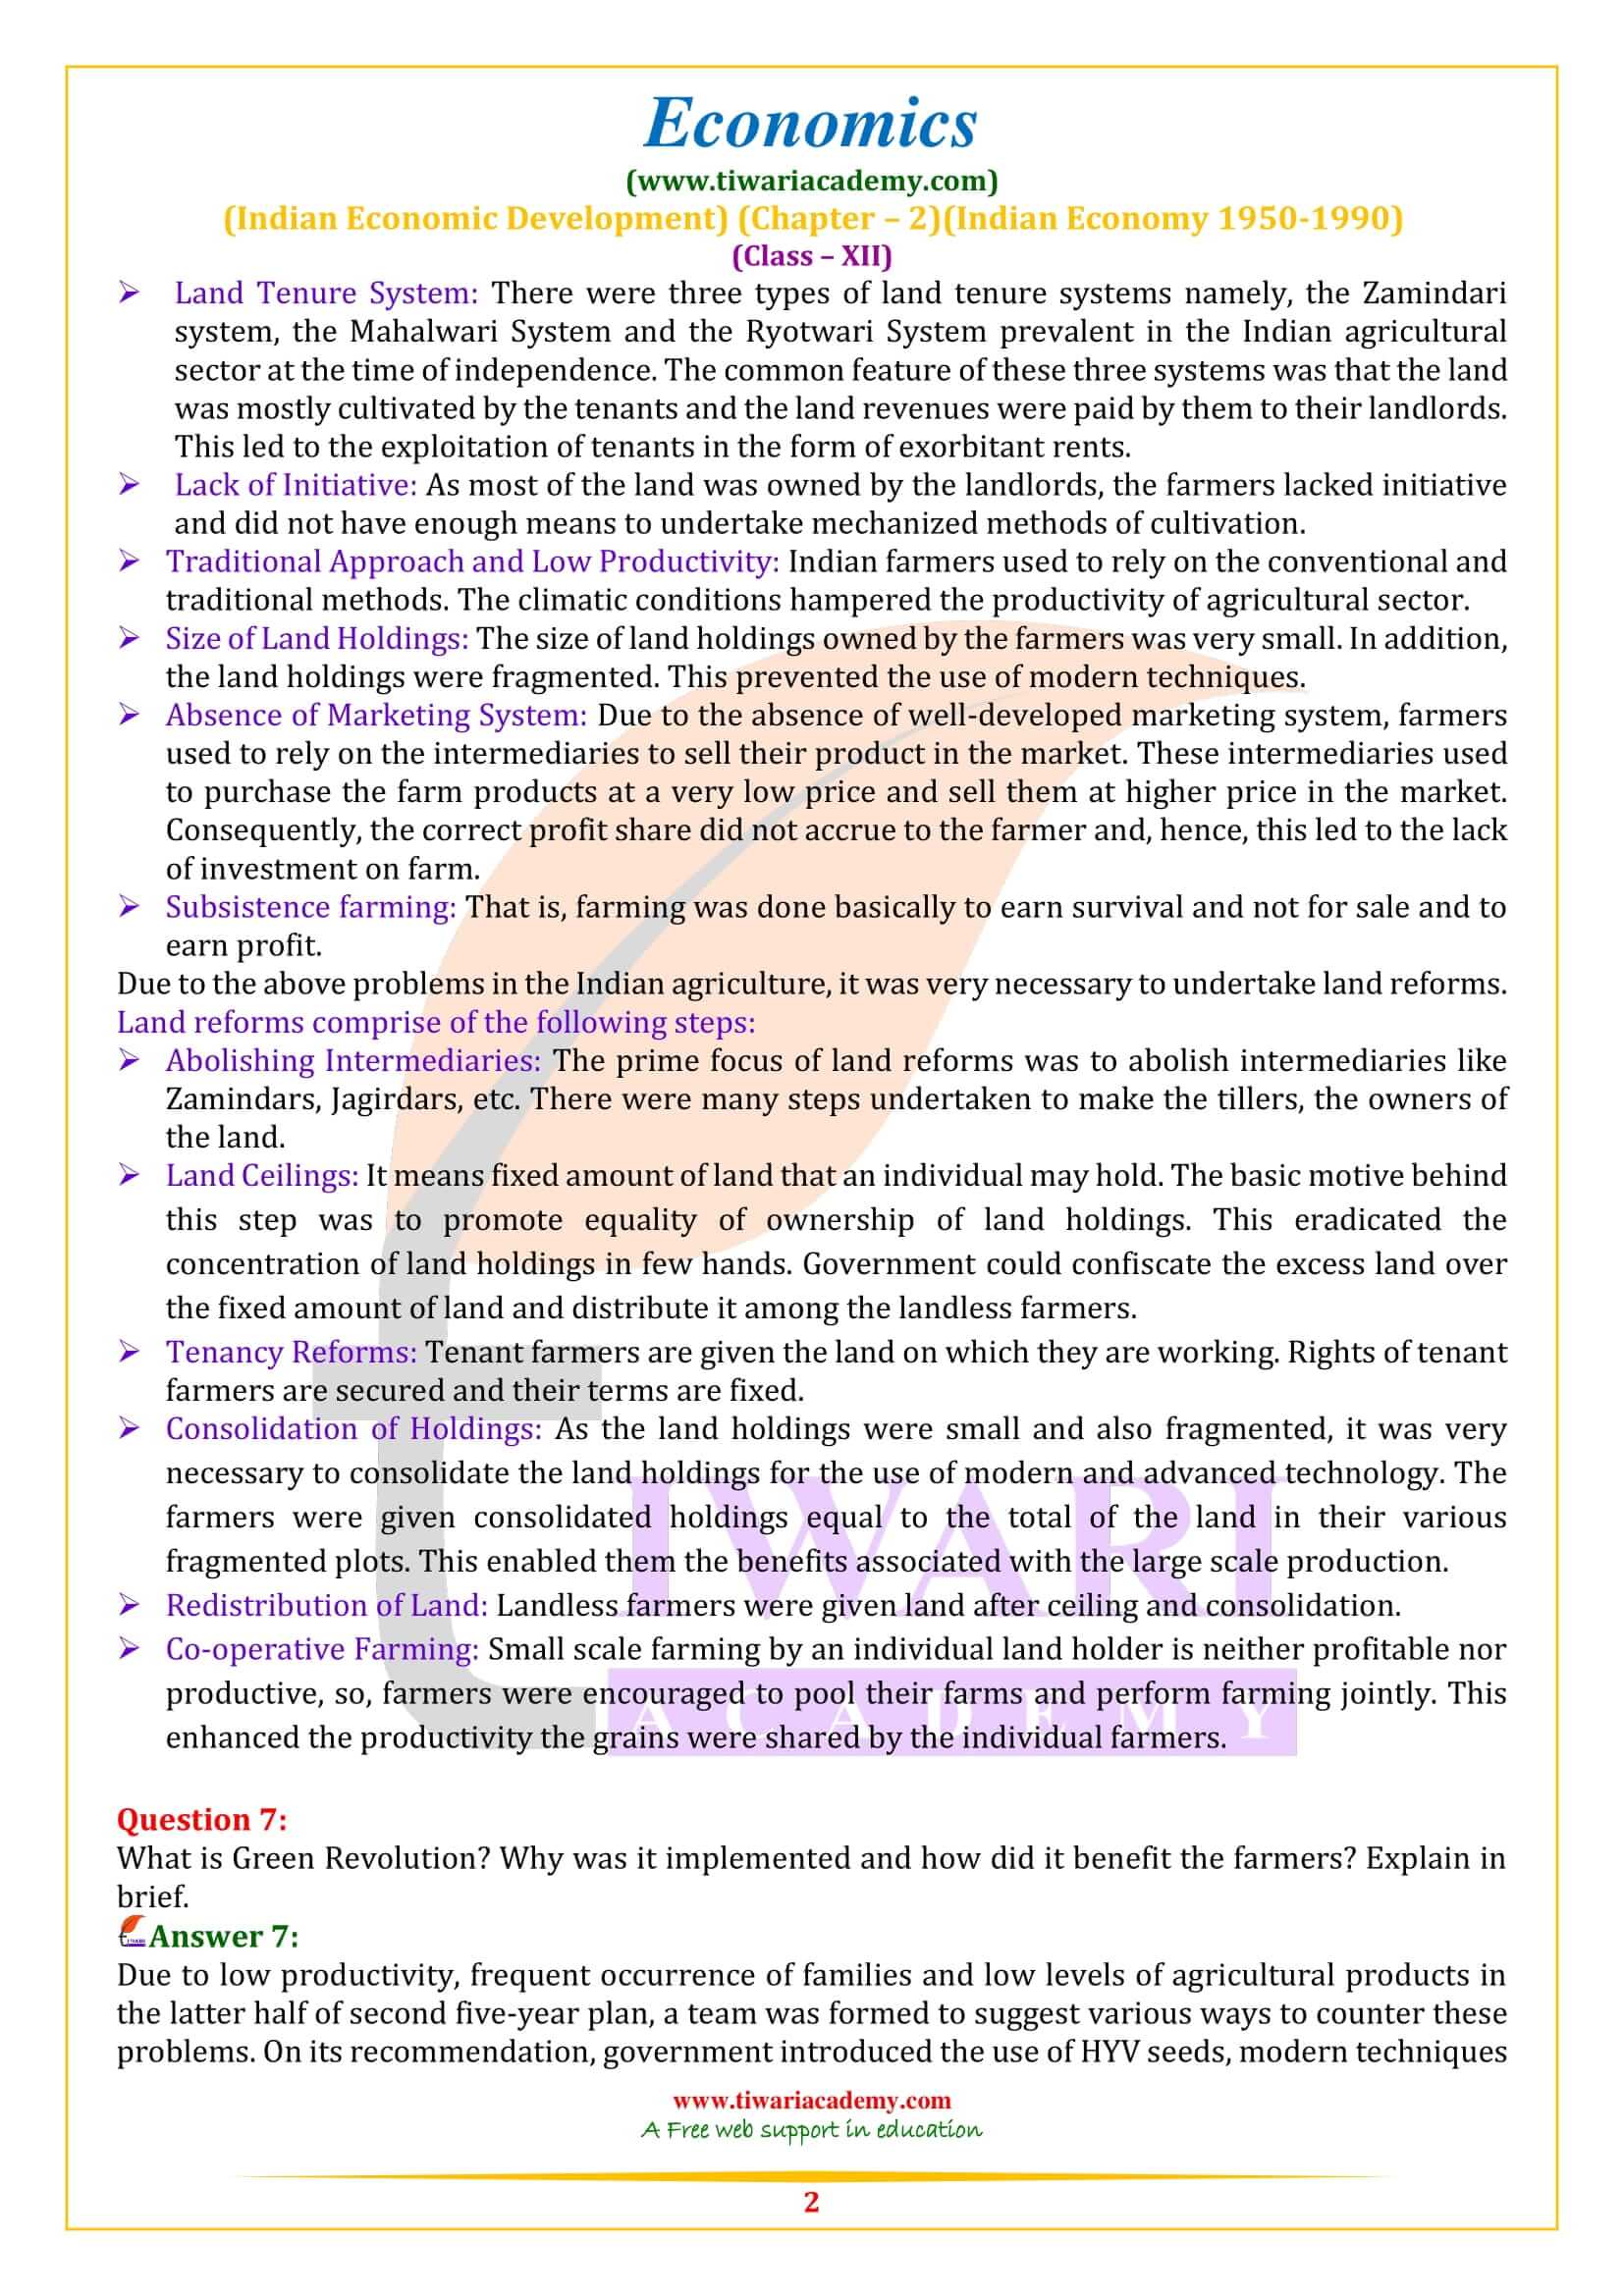 NCERT Solutions for Class 12 Indian Economic Development Chapter 2